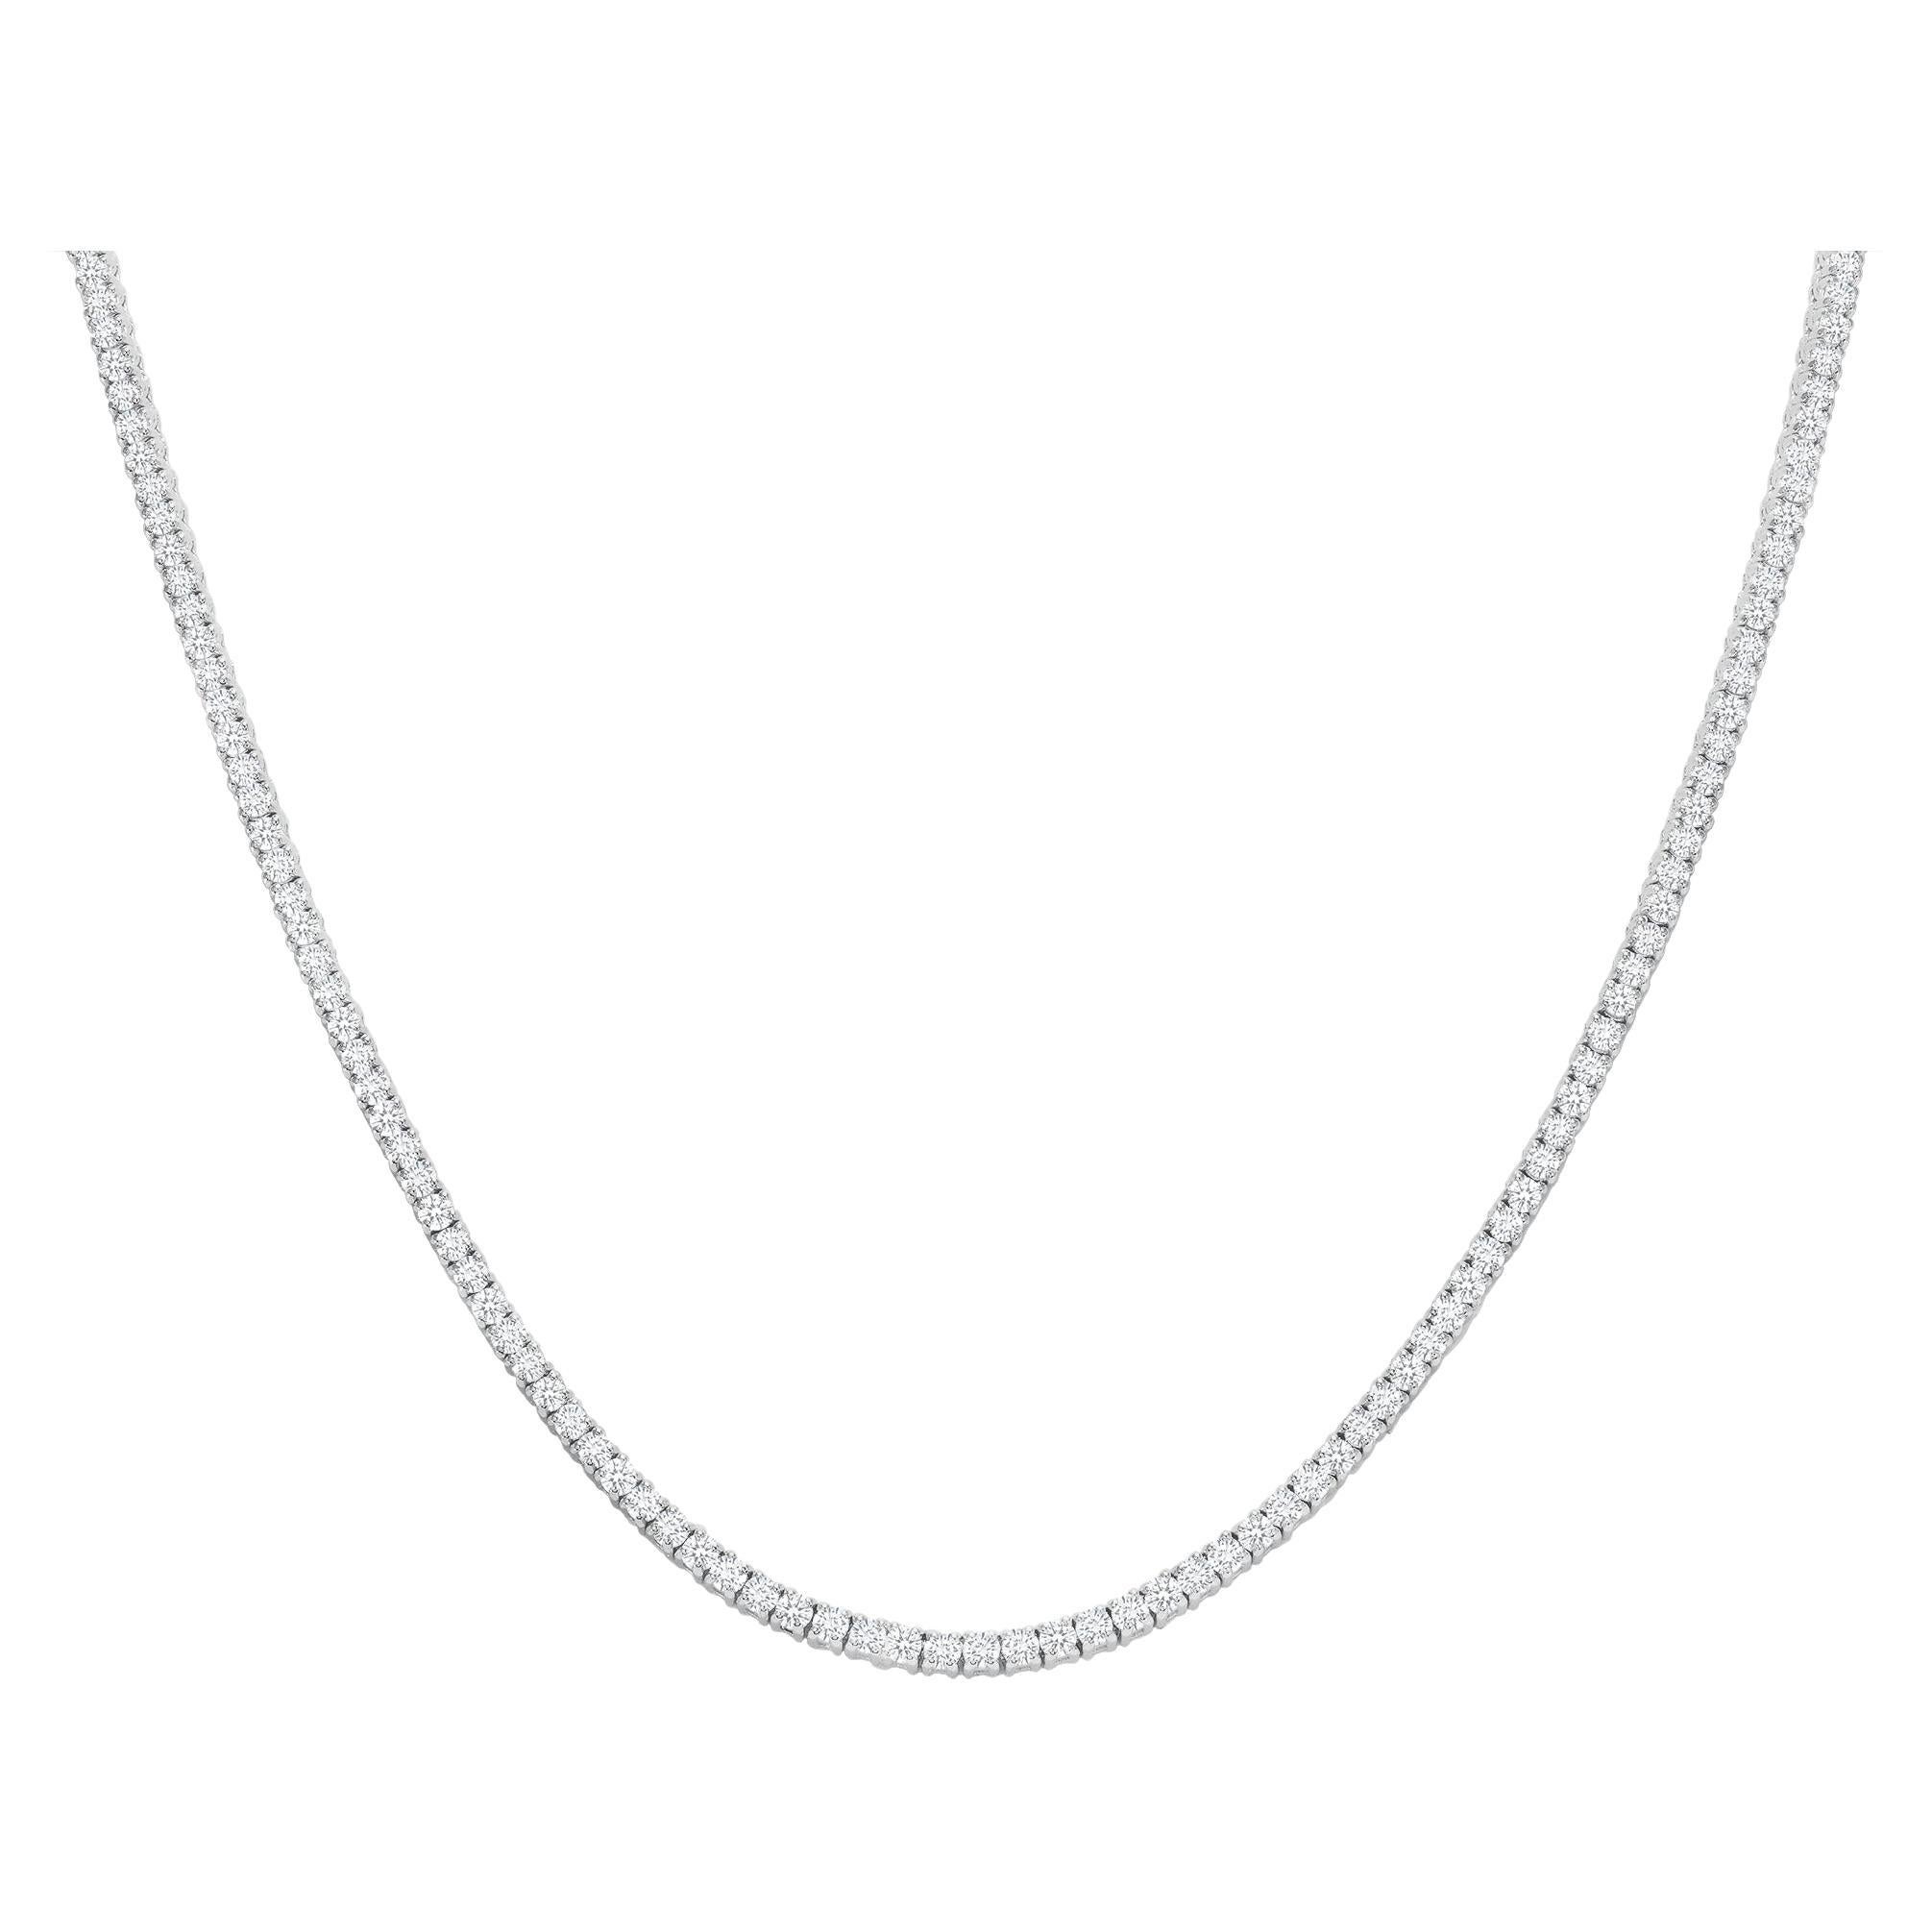 14K White Gold 5.10 Ct Round Diamond Tennis Necklace For Sale